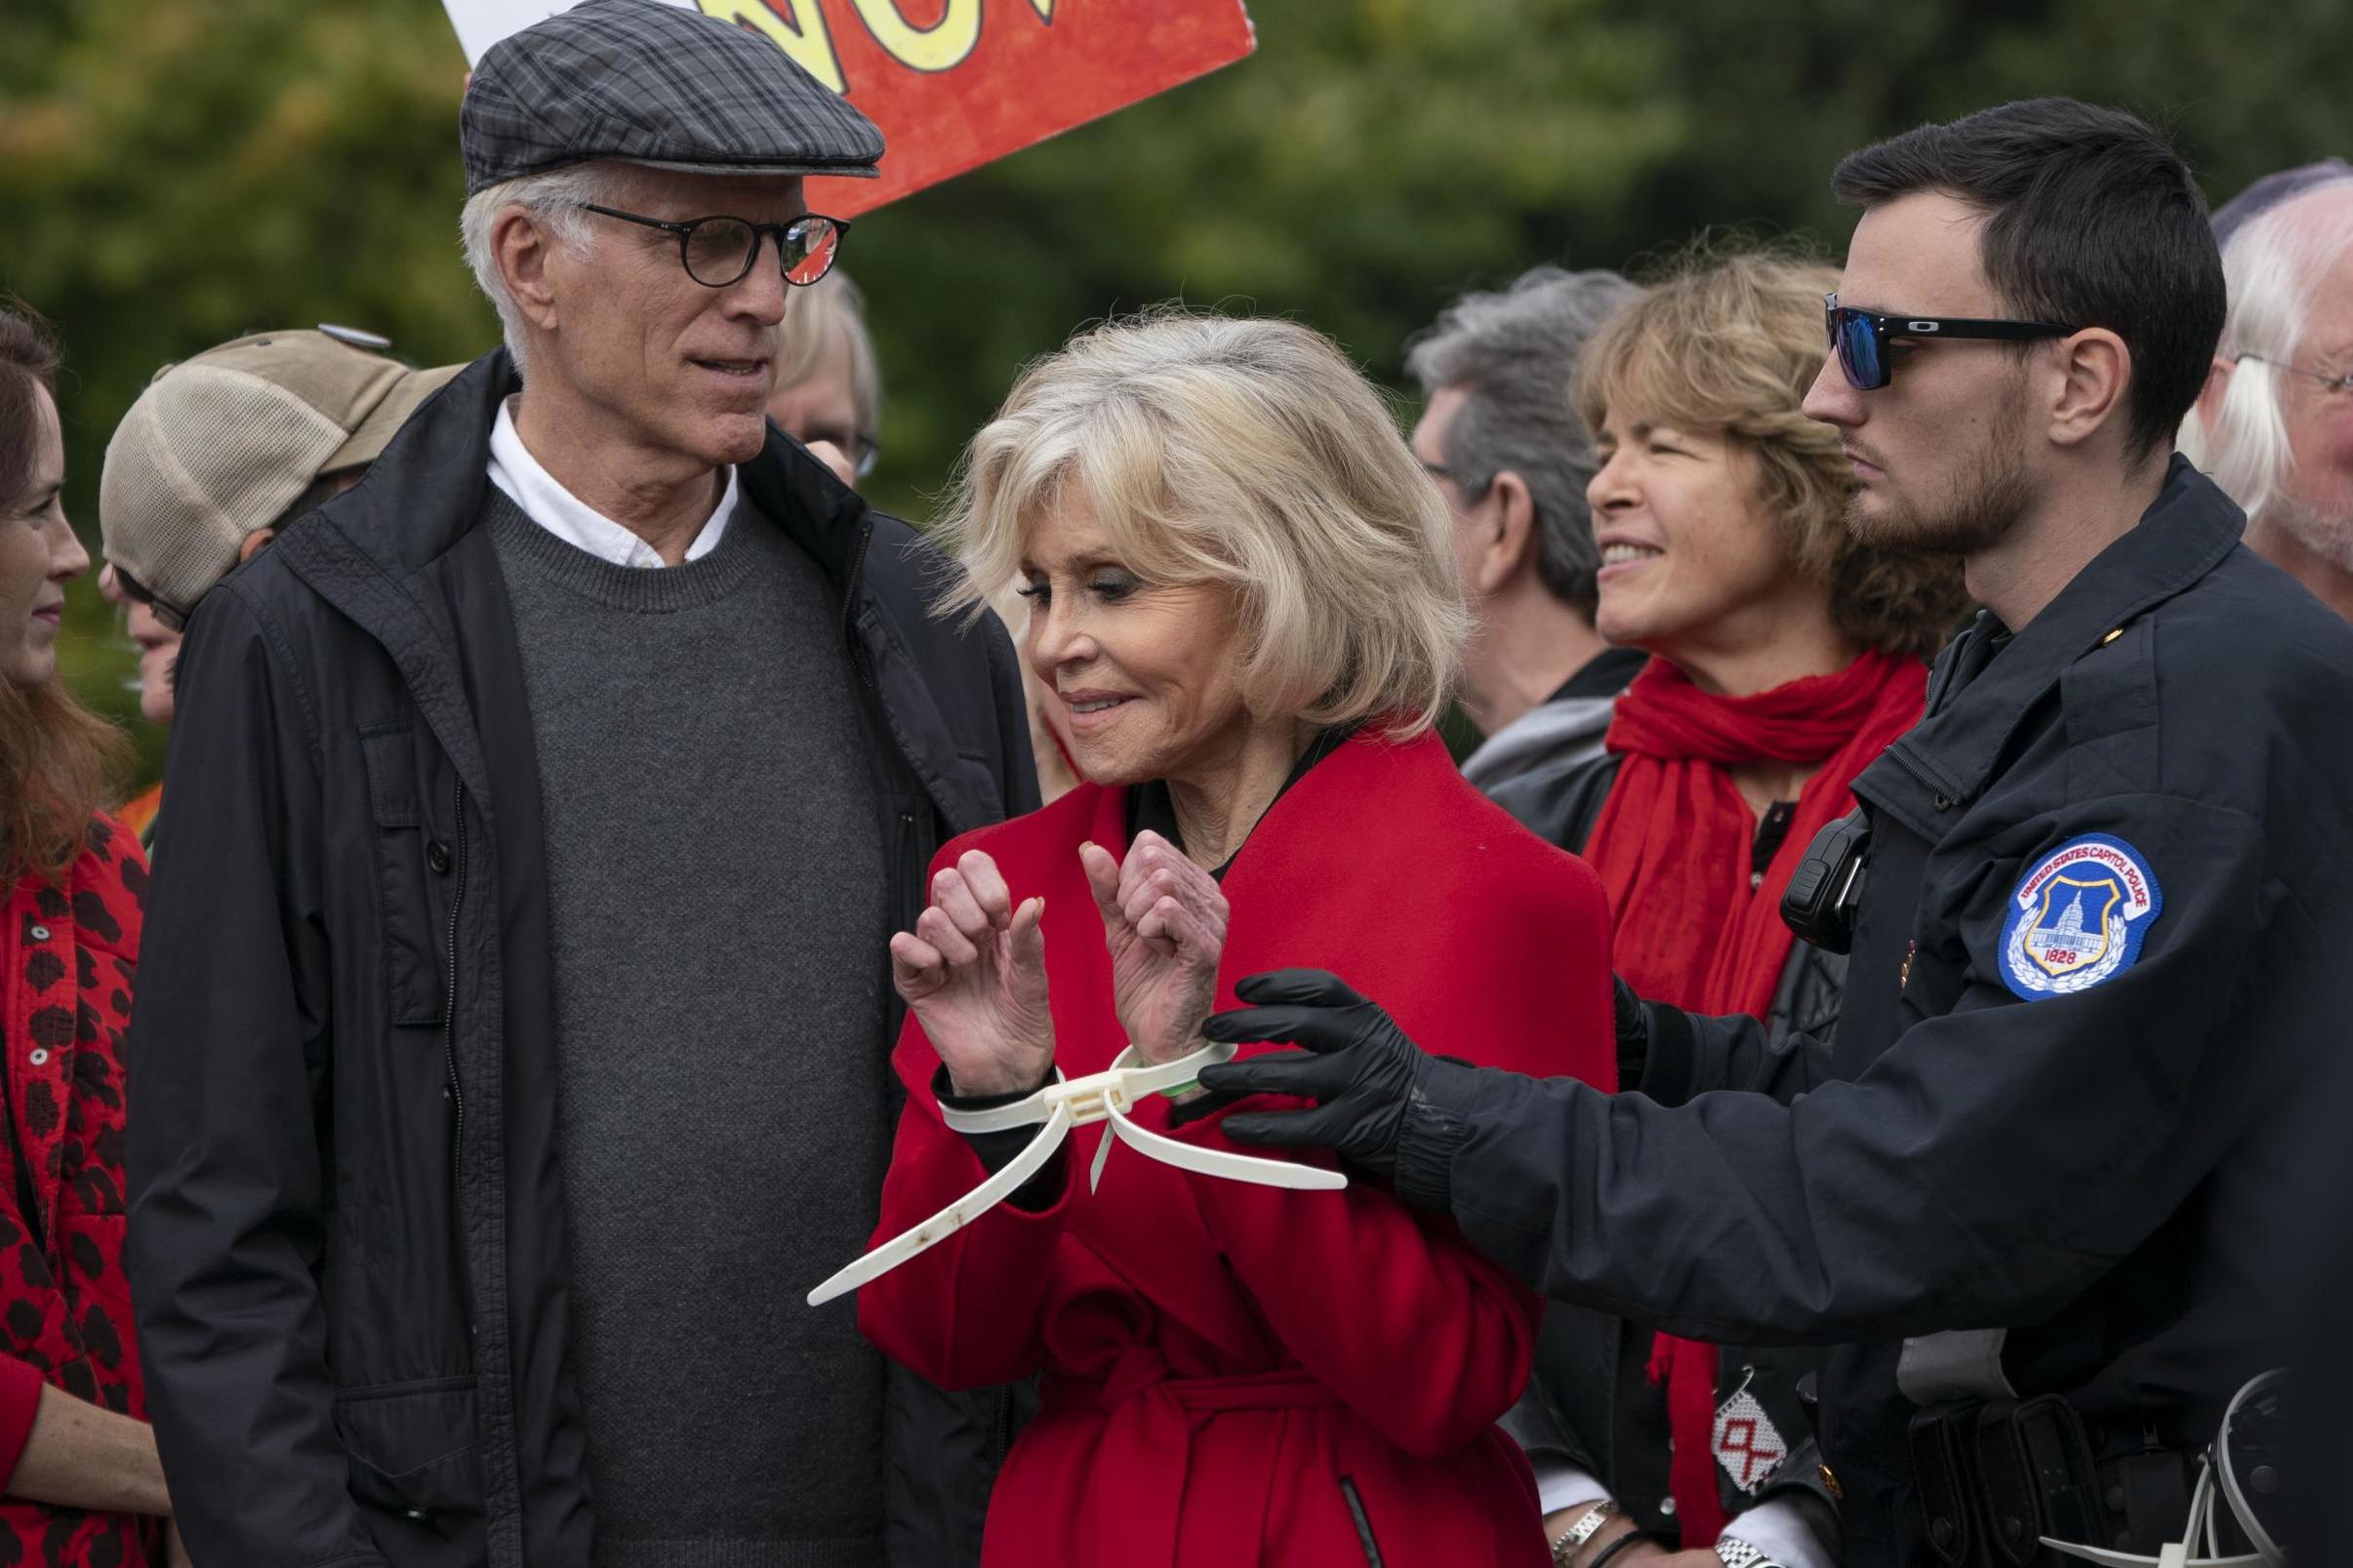 Ted Danson and Jane Fonda arrested while protesting climate change